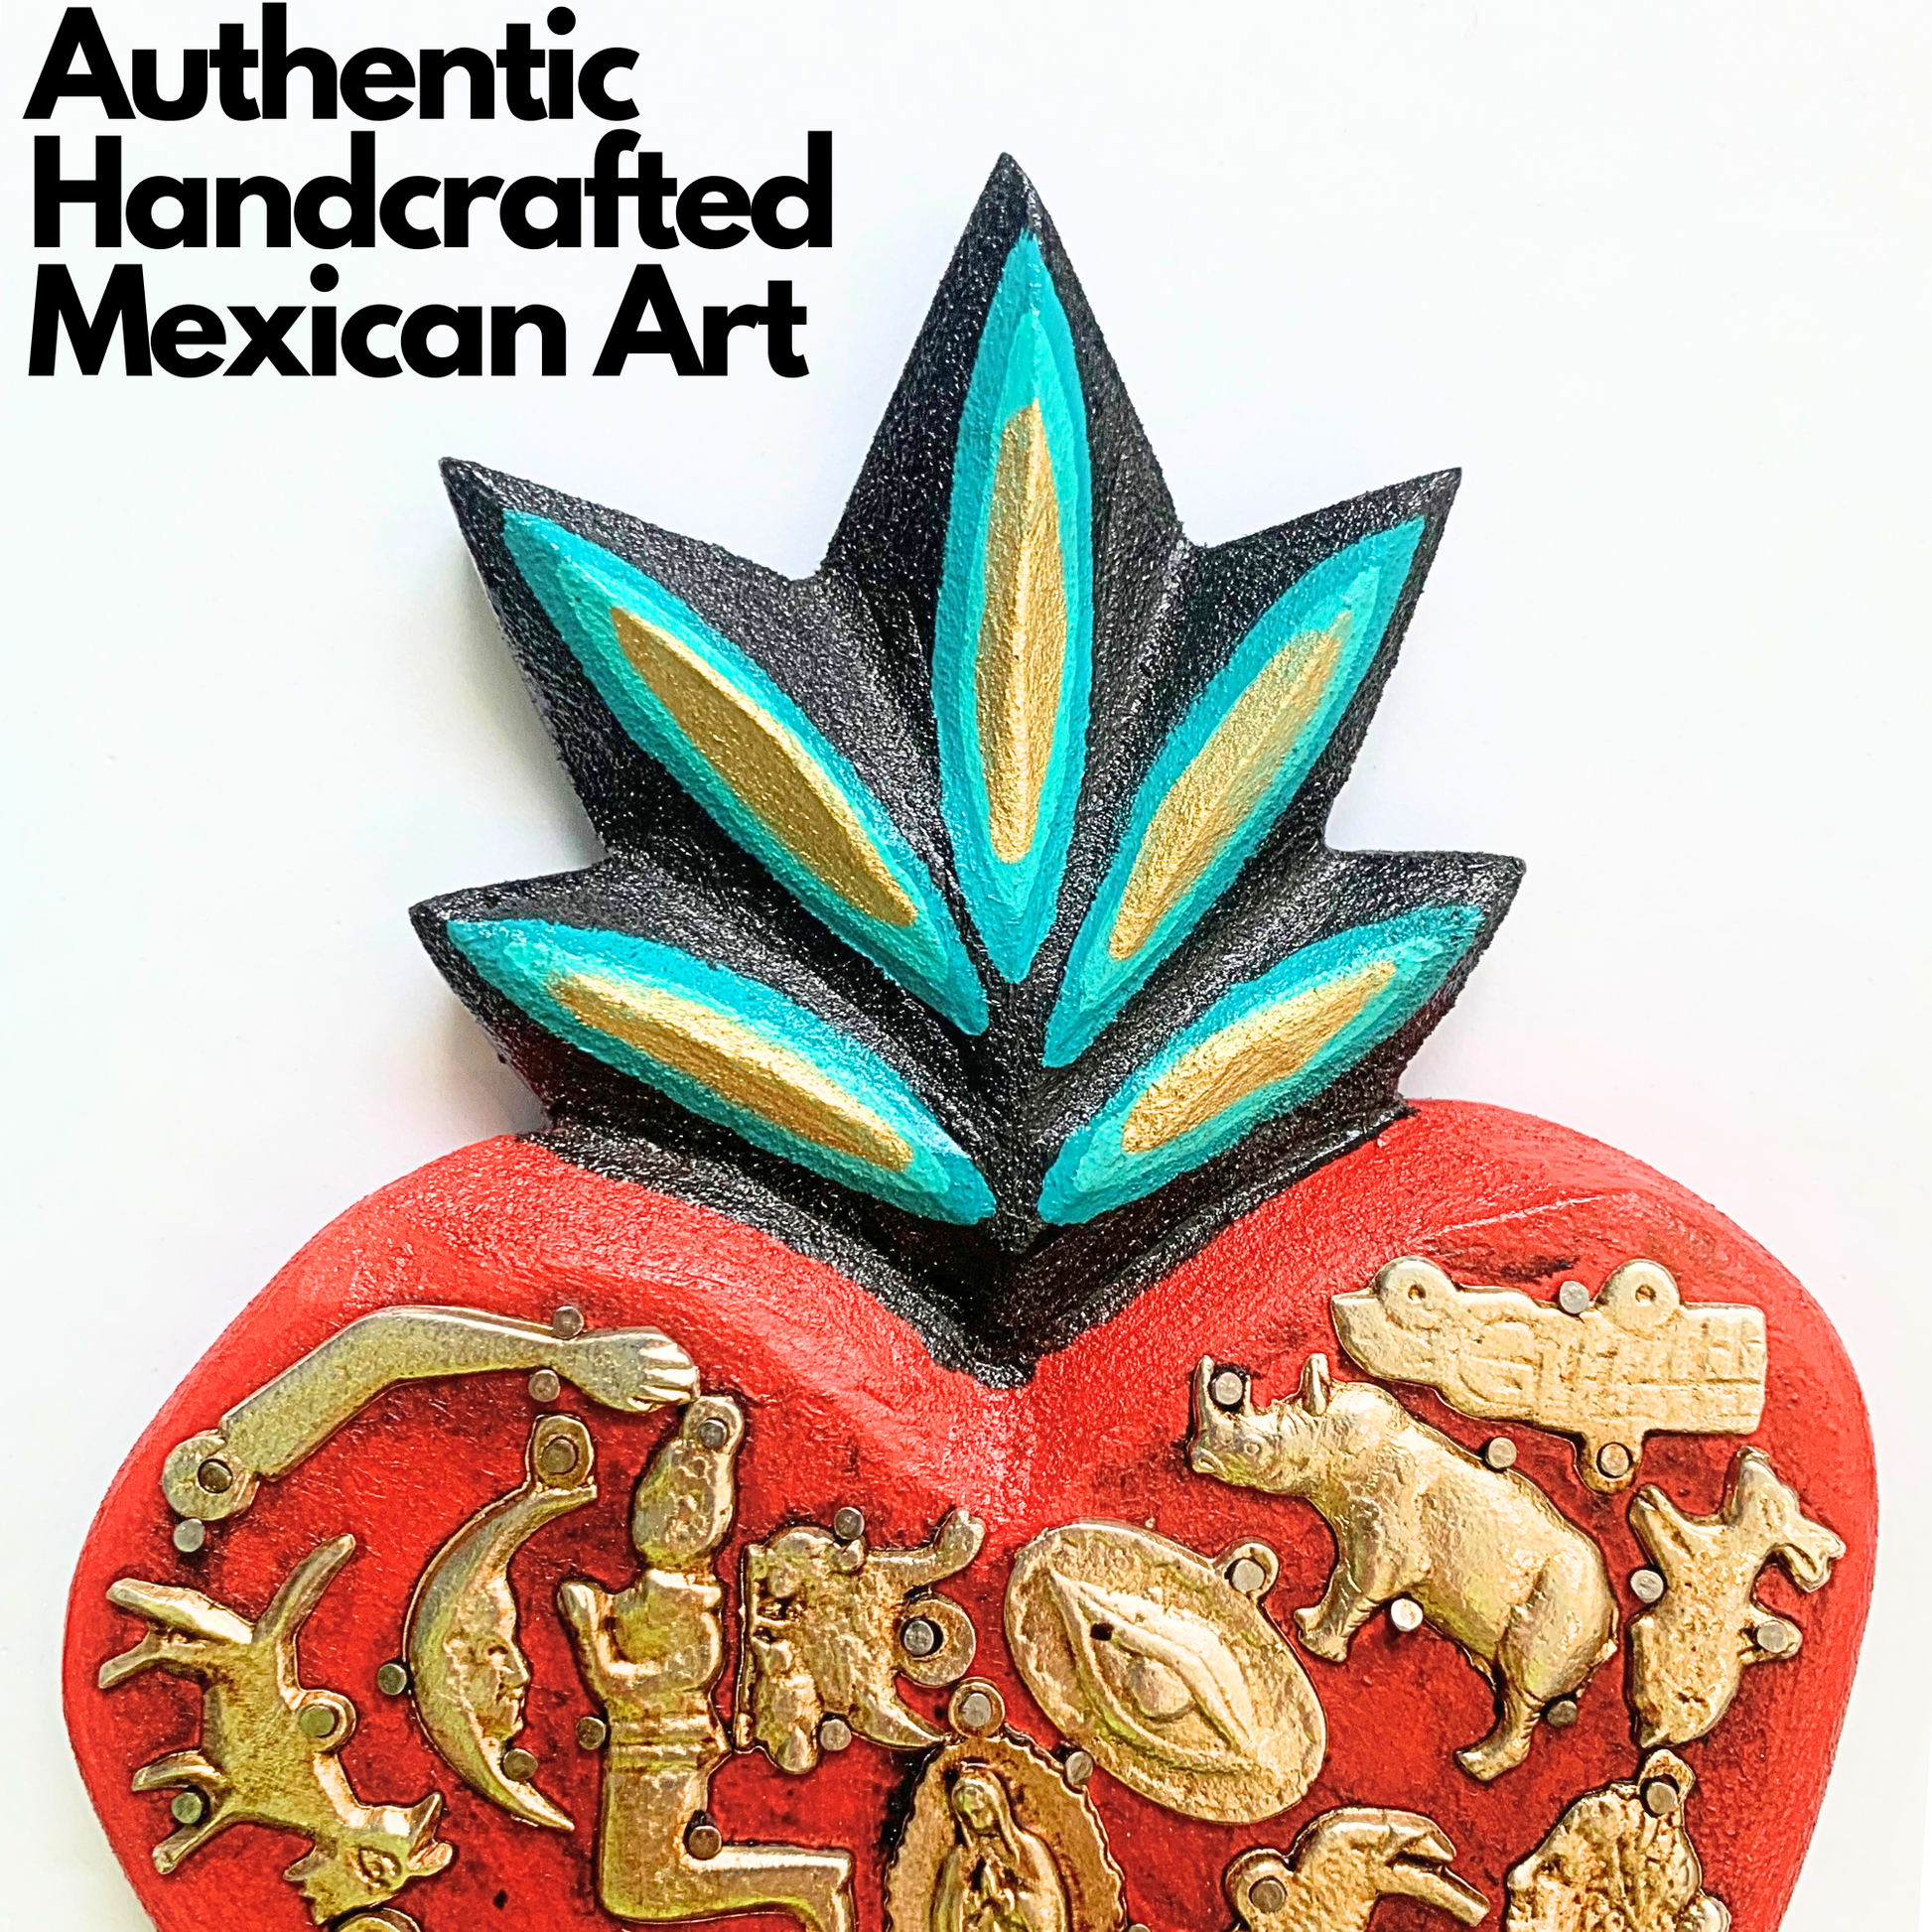 authentic handcrafted mexican art Ex Voto Wooden Sacred Heart with Milagros, handcrafted and hand-painted by Mexican artisans, brightens up any room with its vibrant colors.